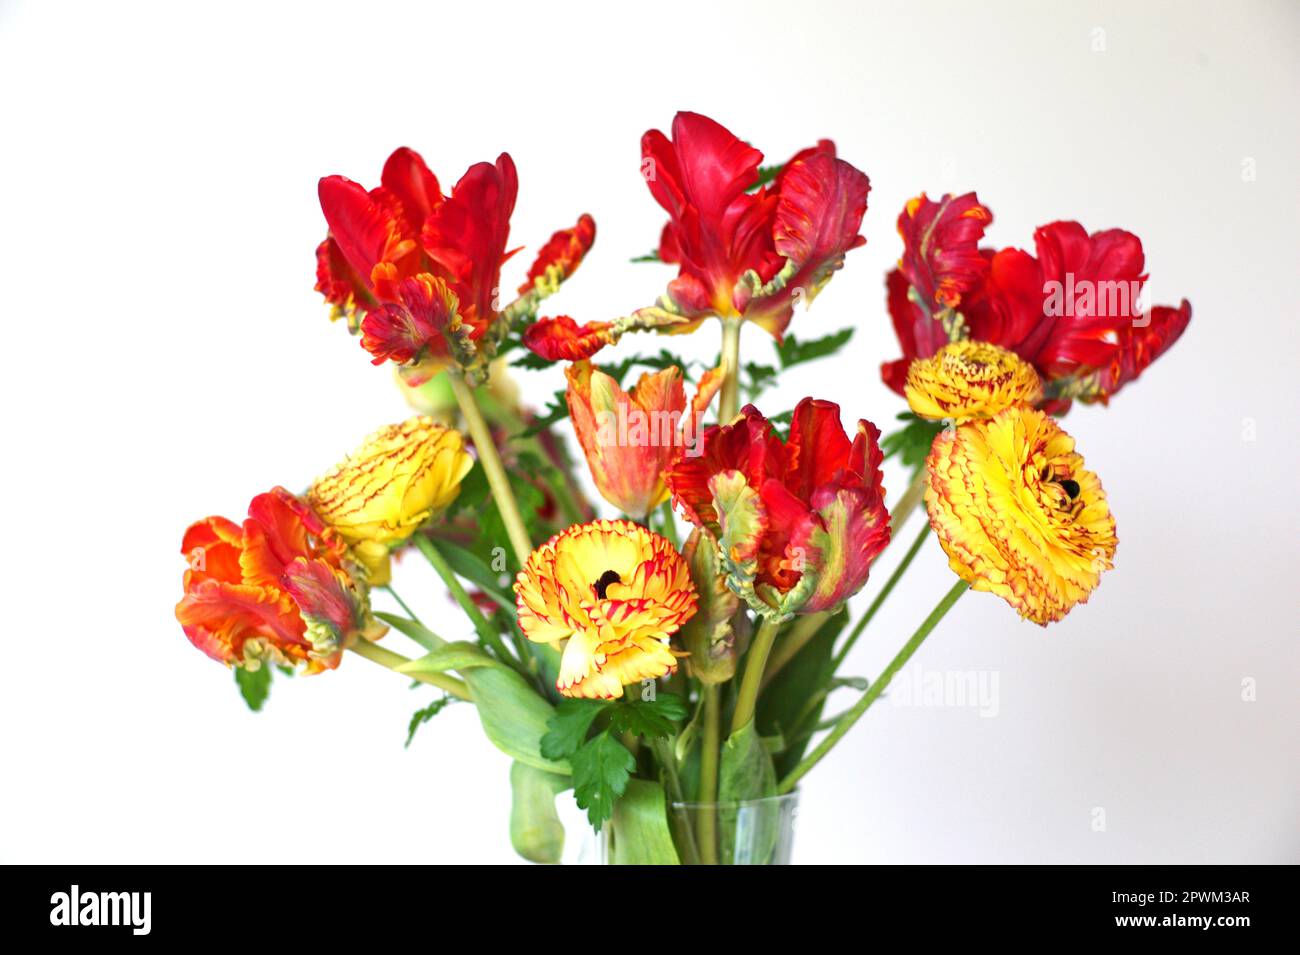 British grown cut flowers with parrot tulips and Ranunculus, UK Stock Photo